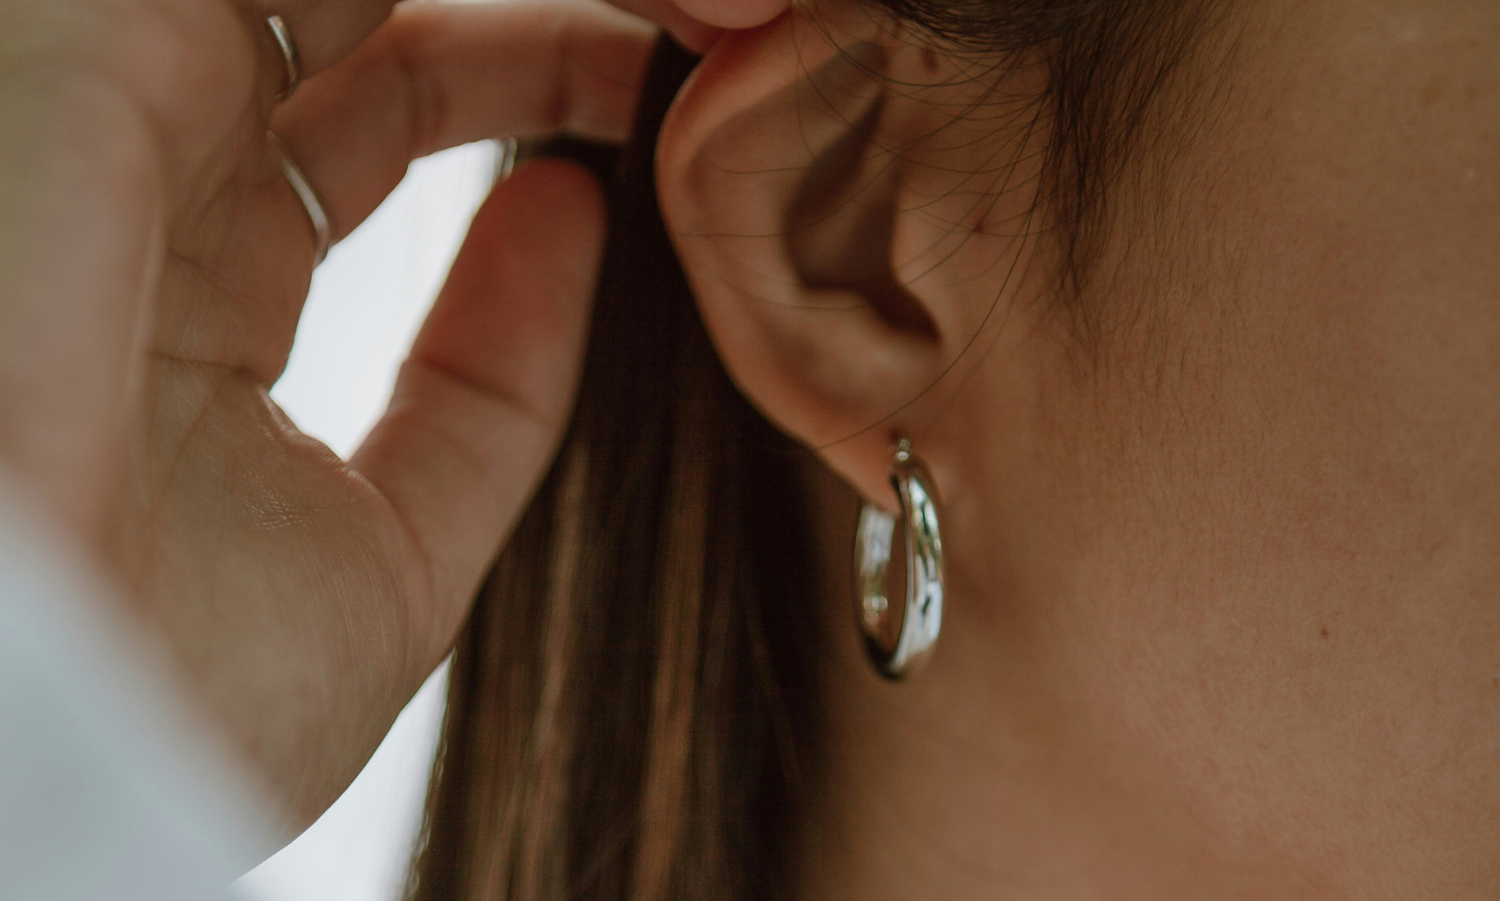 Caring for Your Earrings and Piercings: Tips for Healthy, Stylish Ears